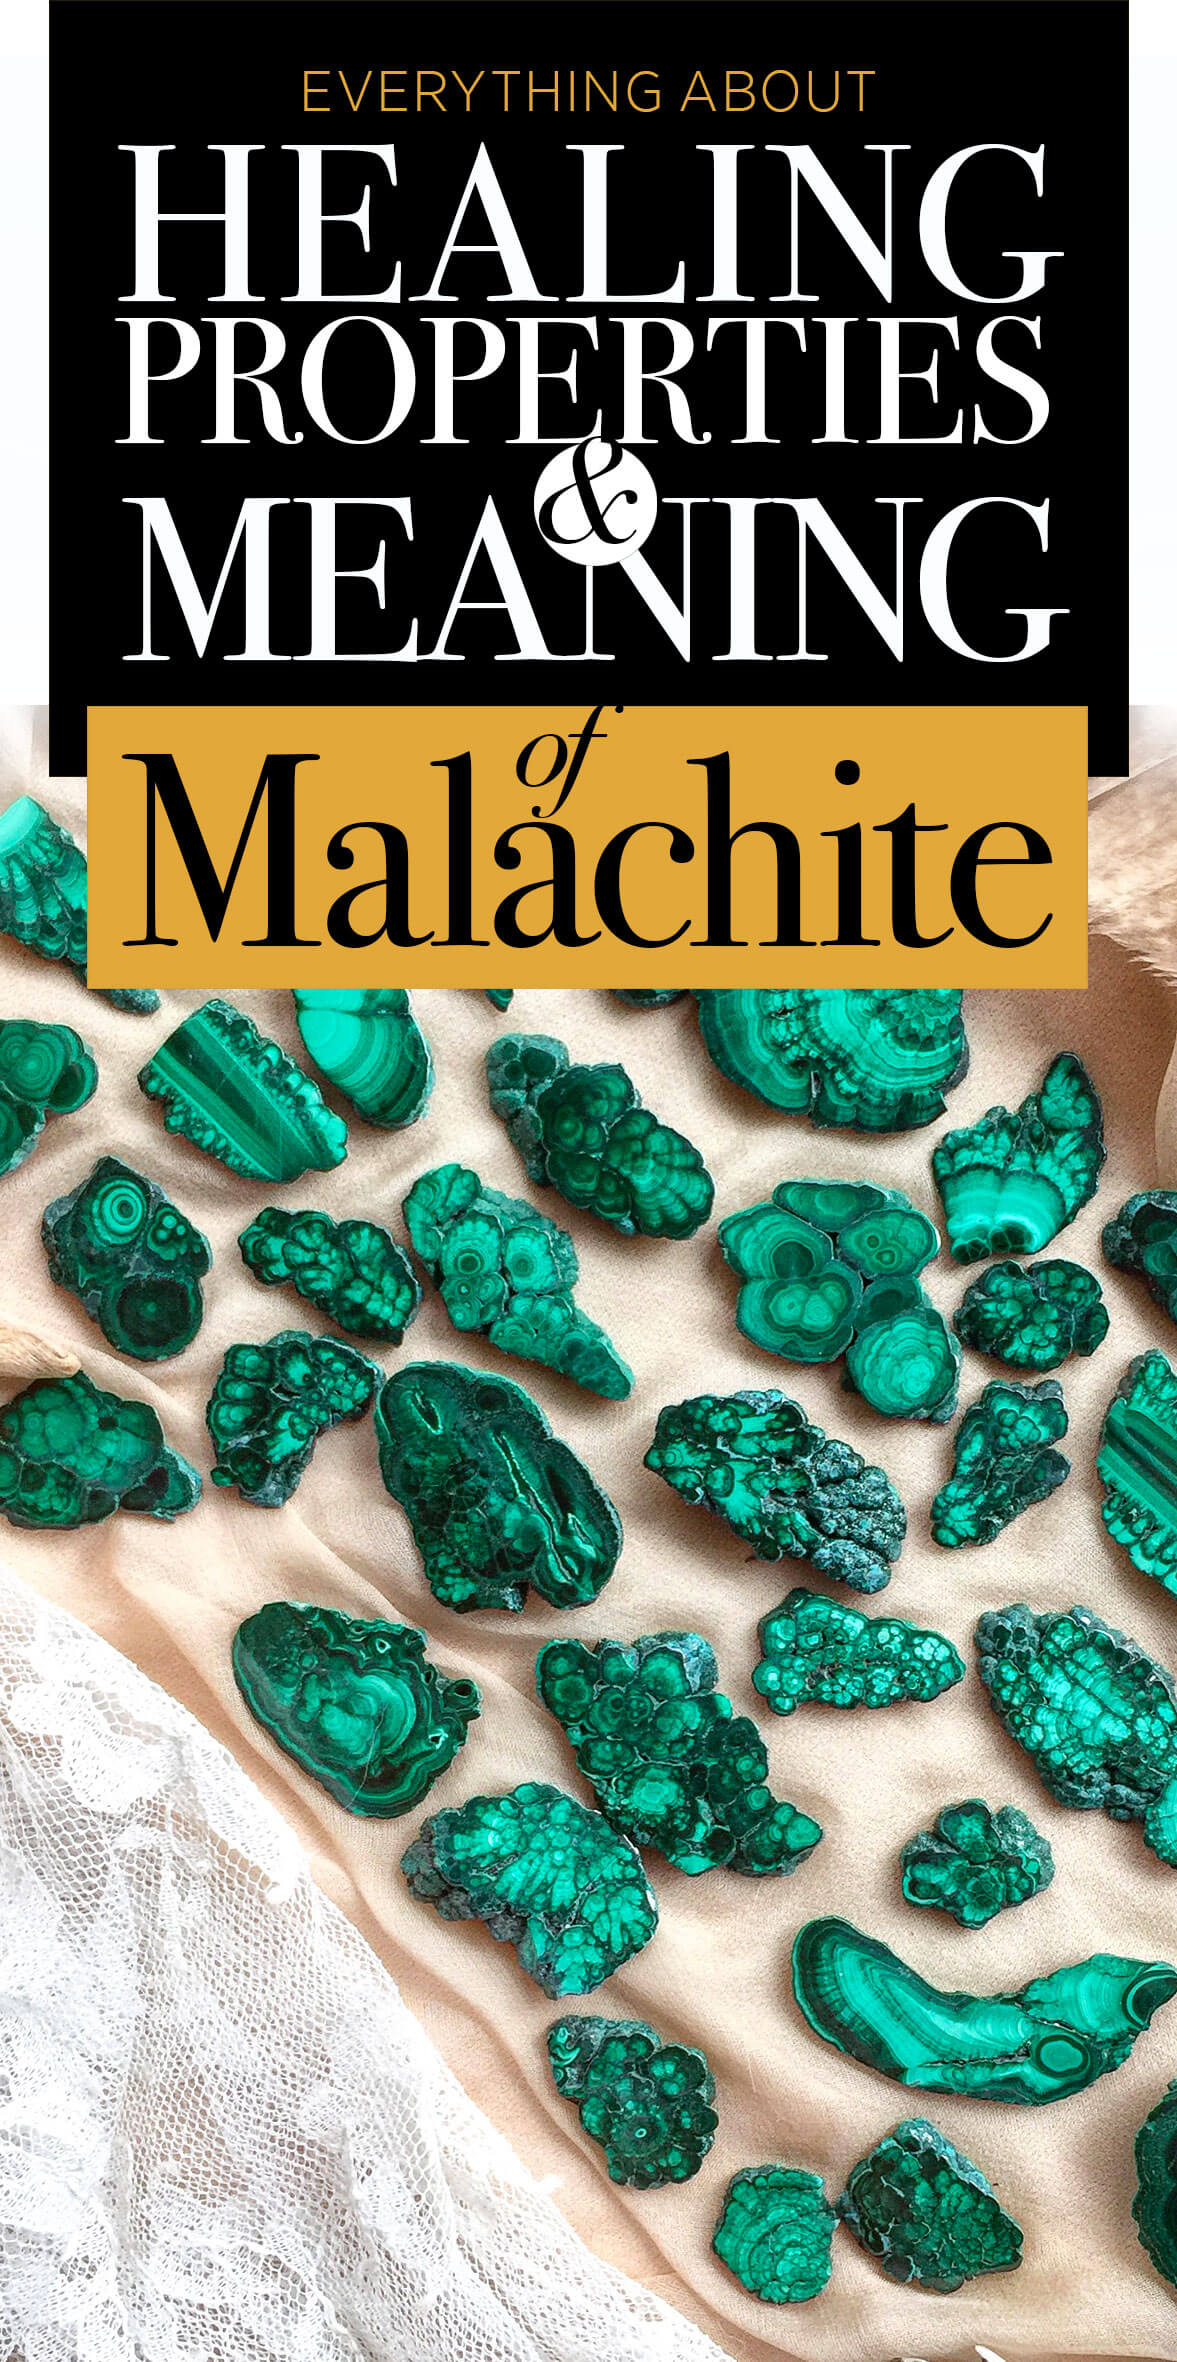 Malachite properties and meanings 